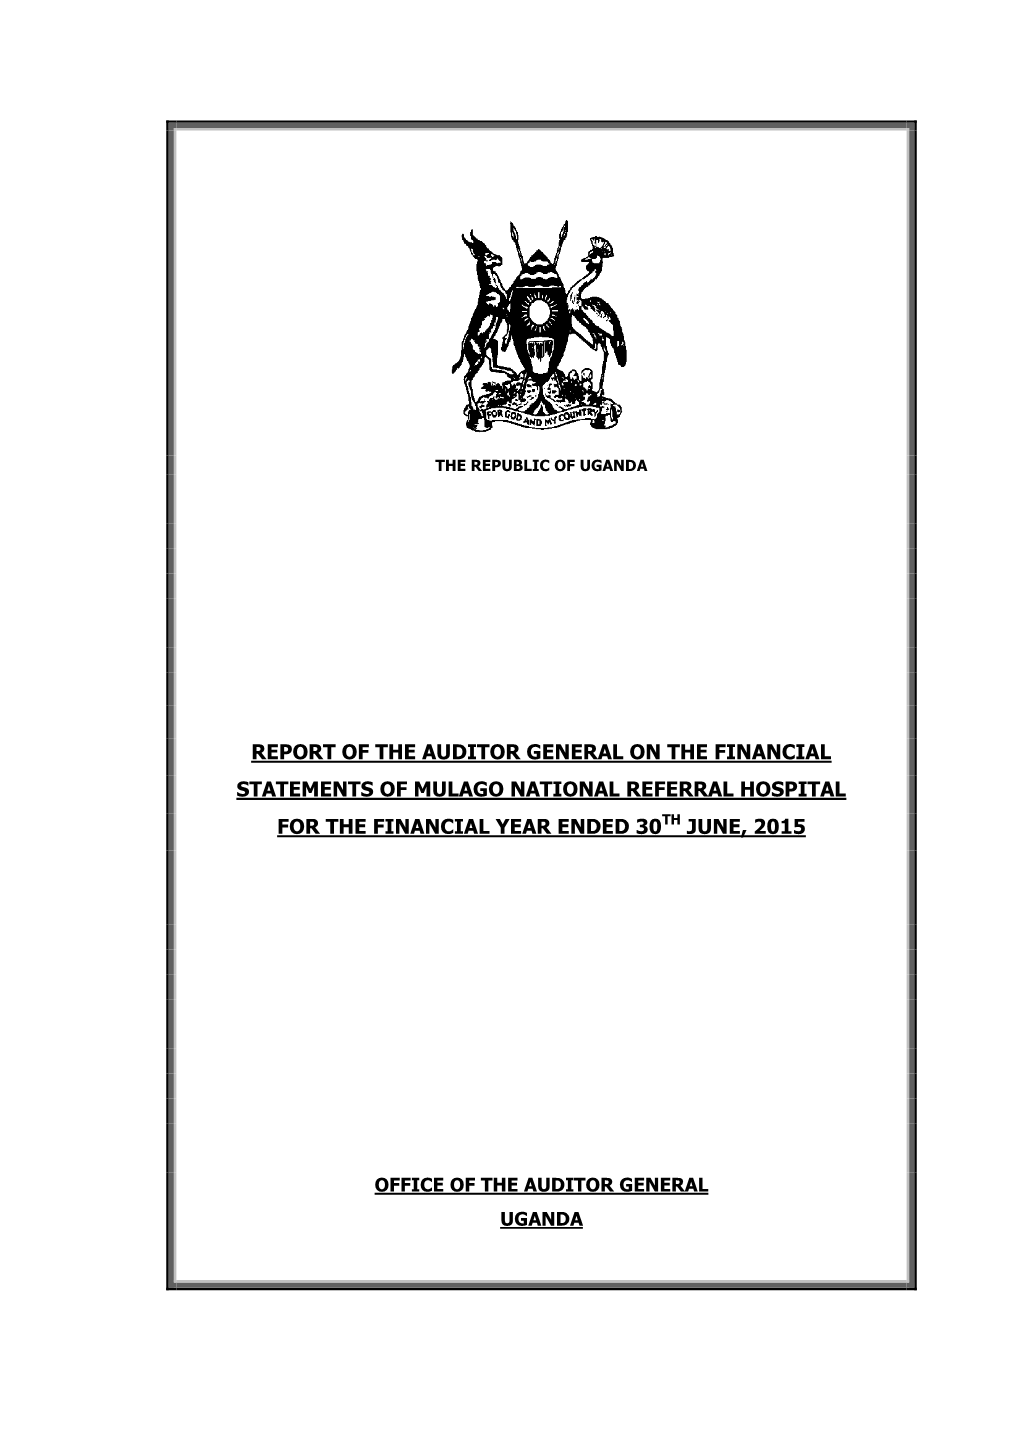 Report of the Auditor General on the Financial Statements of Mulago National Referral Hospital for the Financial Year Ended 30Th June, 2015